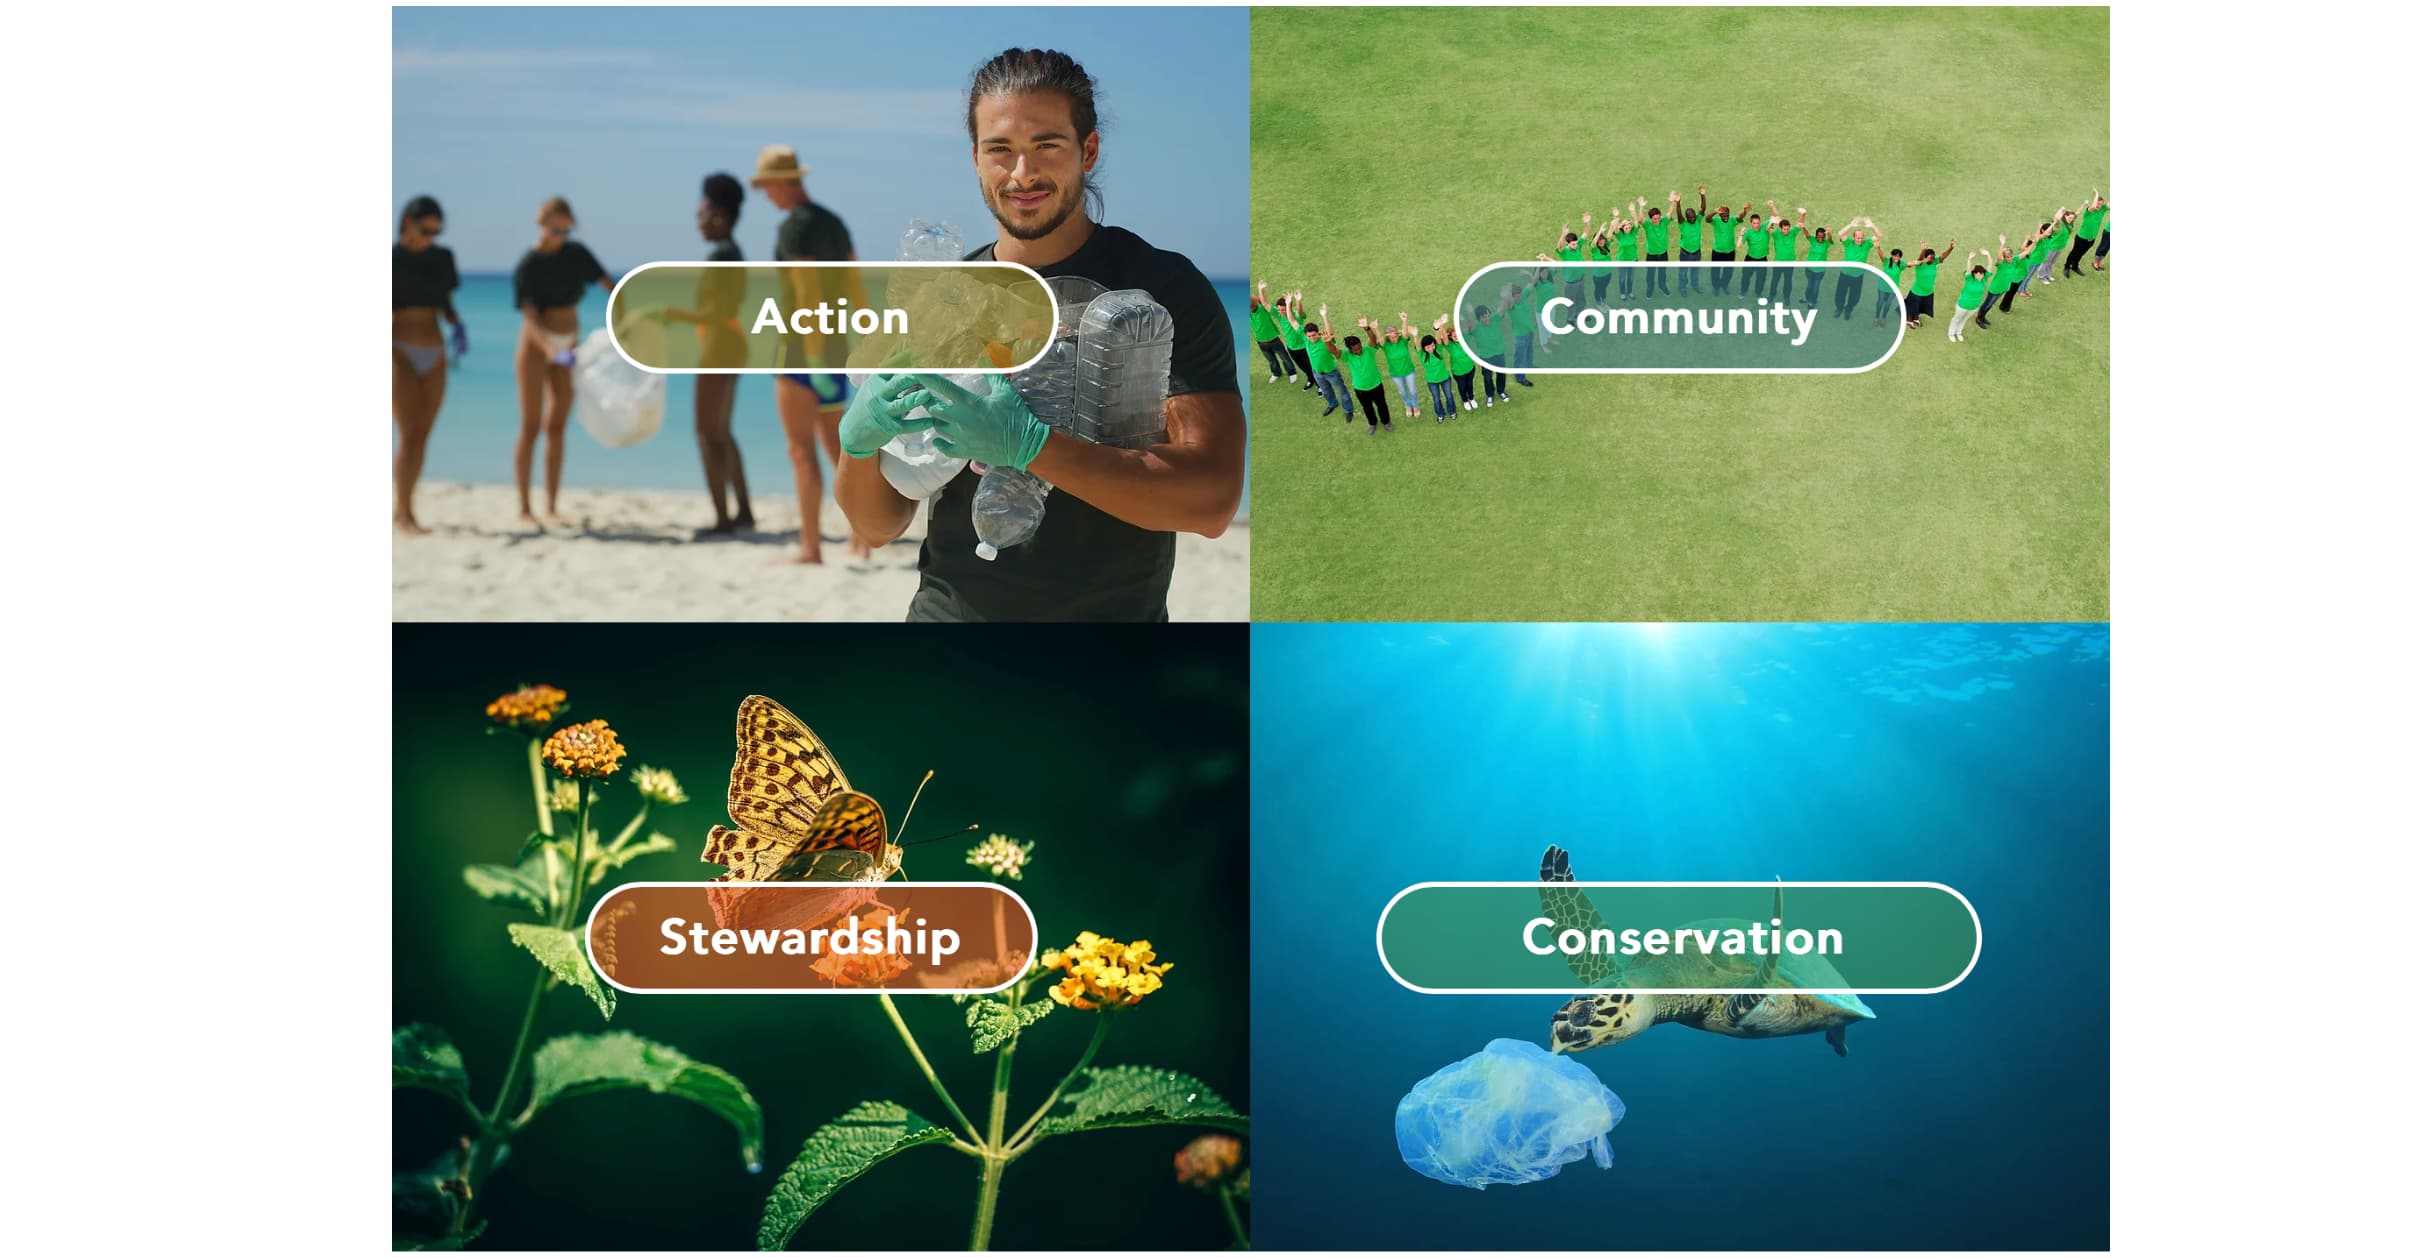 2 by 2 grid of photos. From top left clockwise: a photo of a bearded person carrying a bunch of plastic bottles at a beach clean up, a group of people standing with their arms up and in a swirl arc formation, a sea turtle grabbing a plastic bag underwater, and a brown spotted butterfly on a bunch of tiny yellow flowers. There is also text on top of each photo, respectively: Action, Community, Conservation, Stewardship.